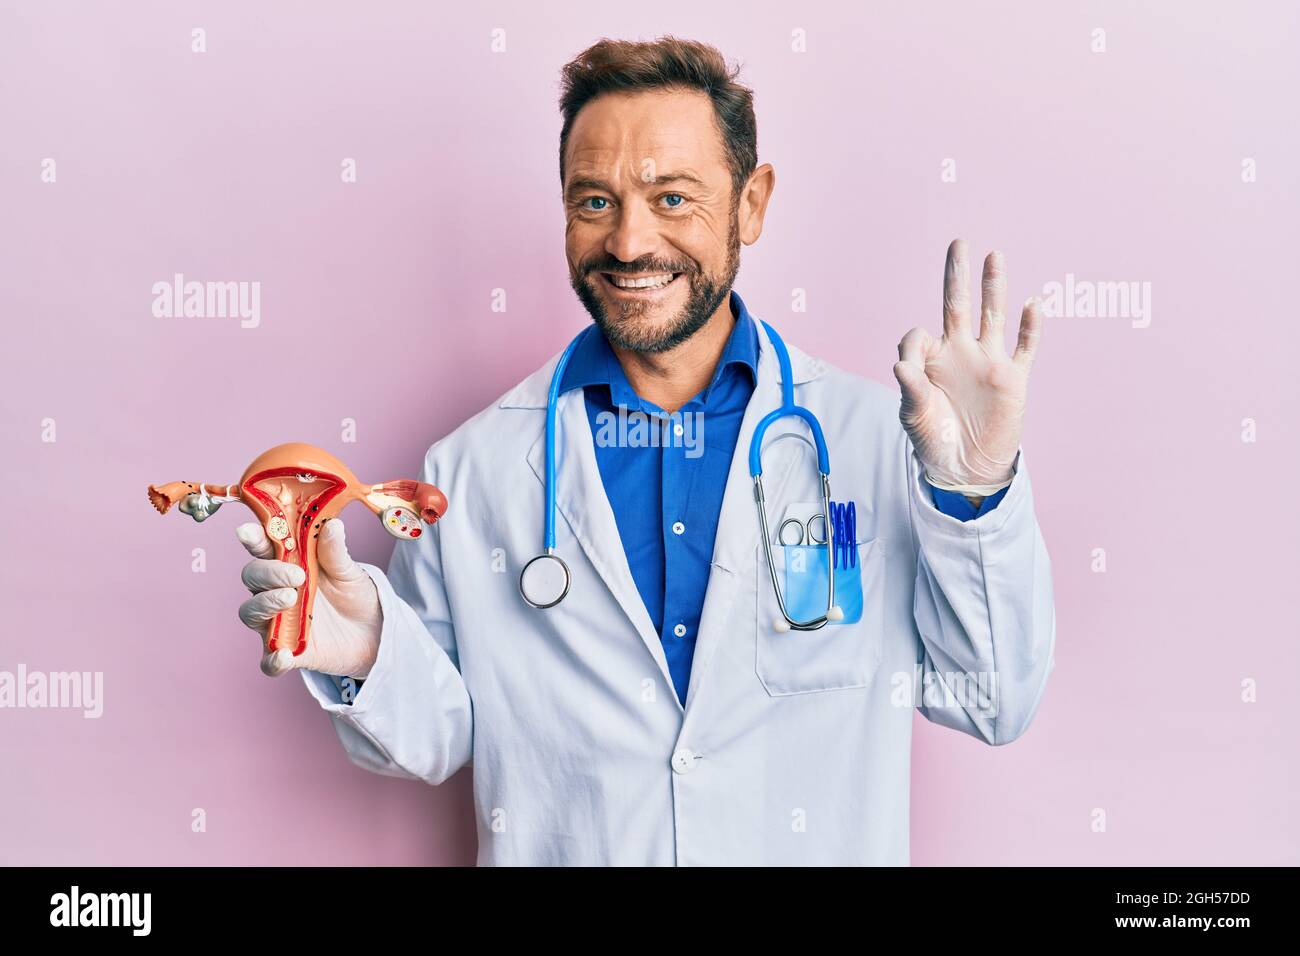 Middle age gynecologist man holding anatomical model of female genital organ doing ok sign with fingers, smiling friendly gesturing excellent symbol Stock Photo